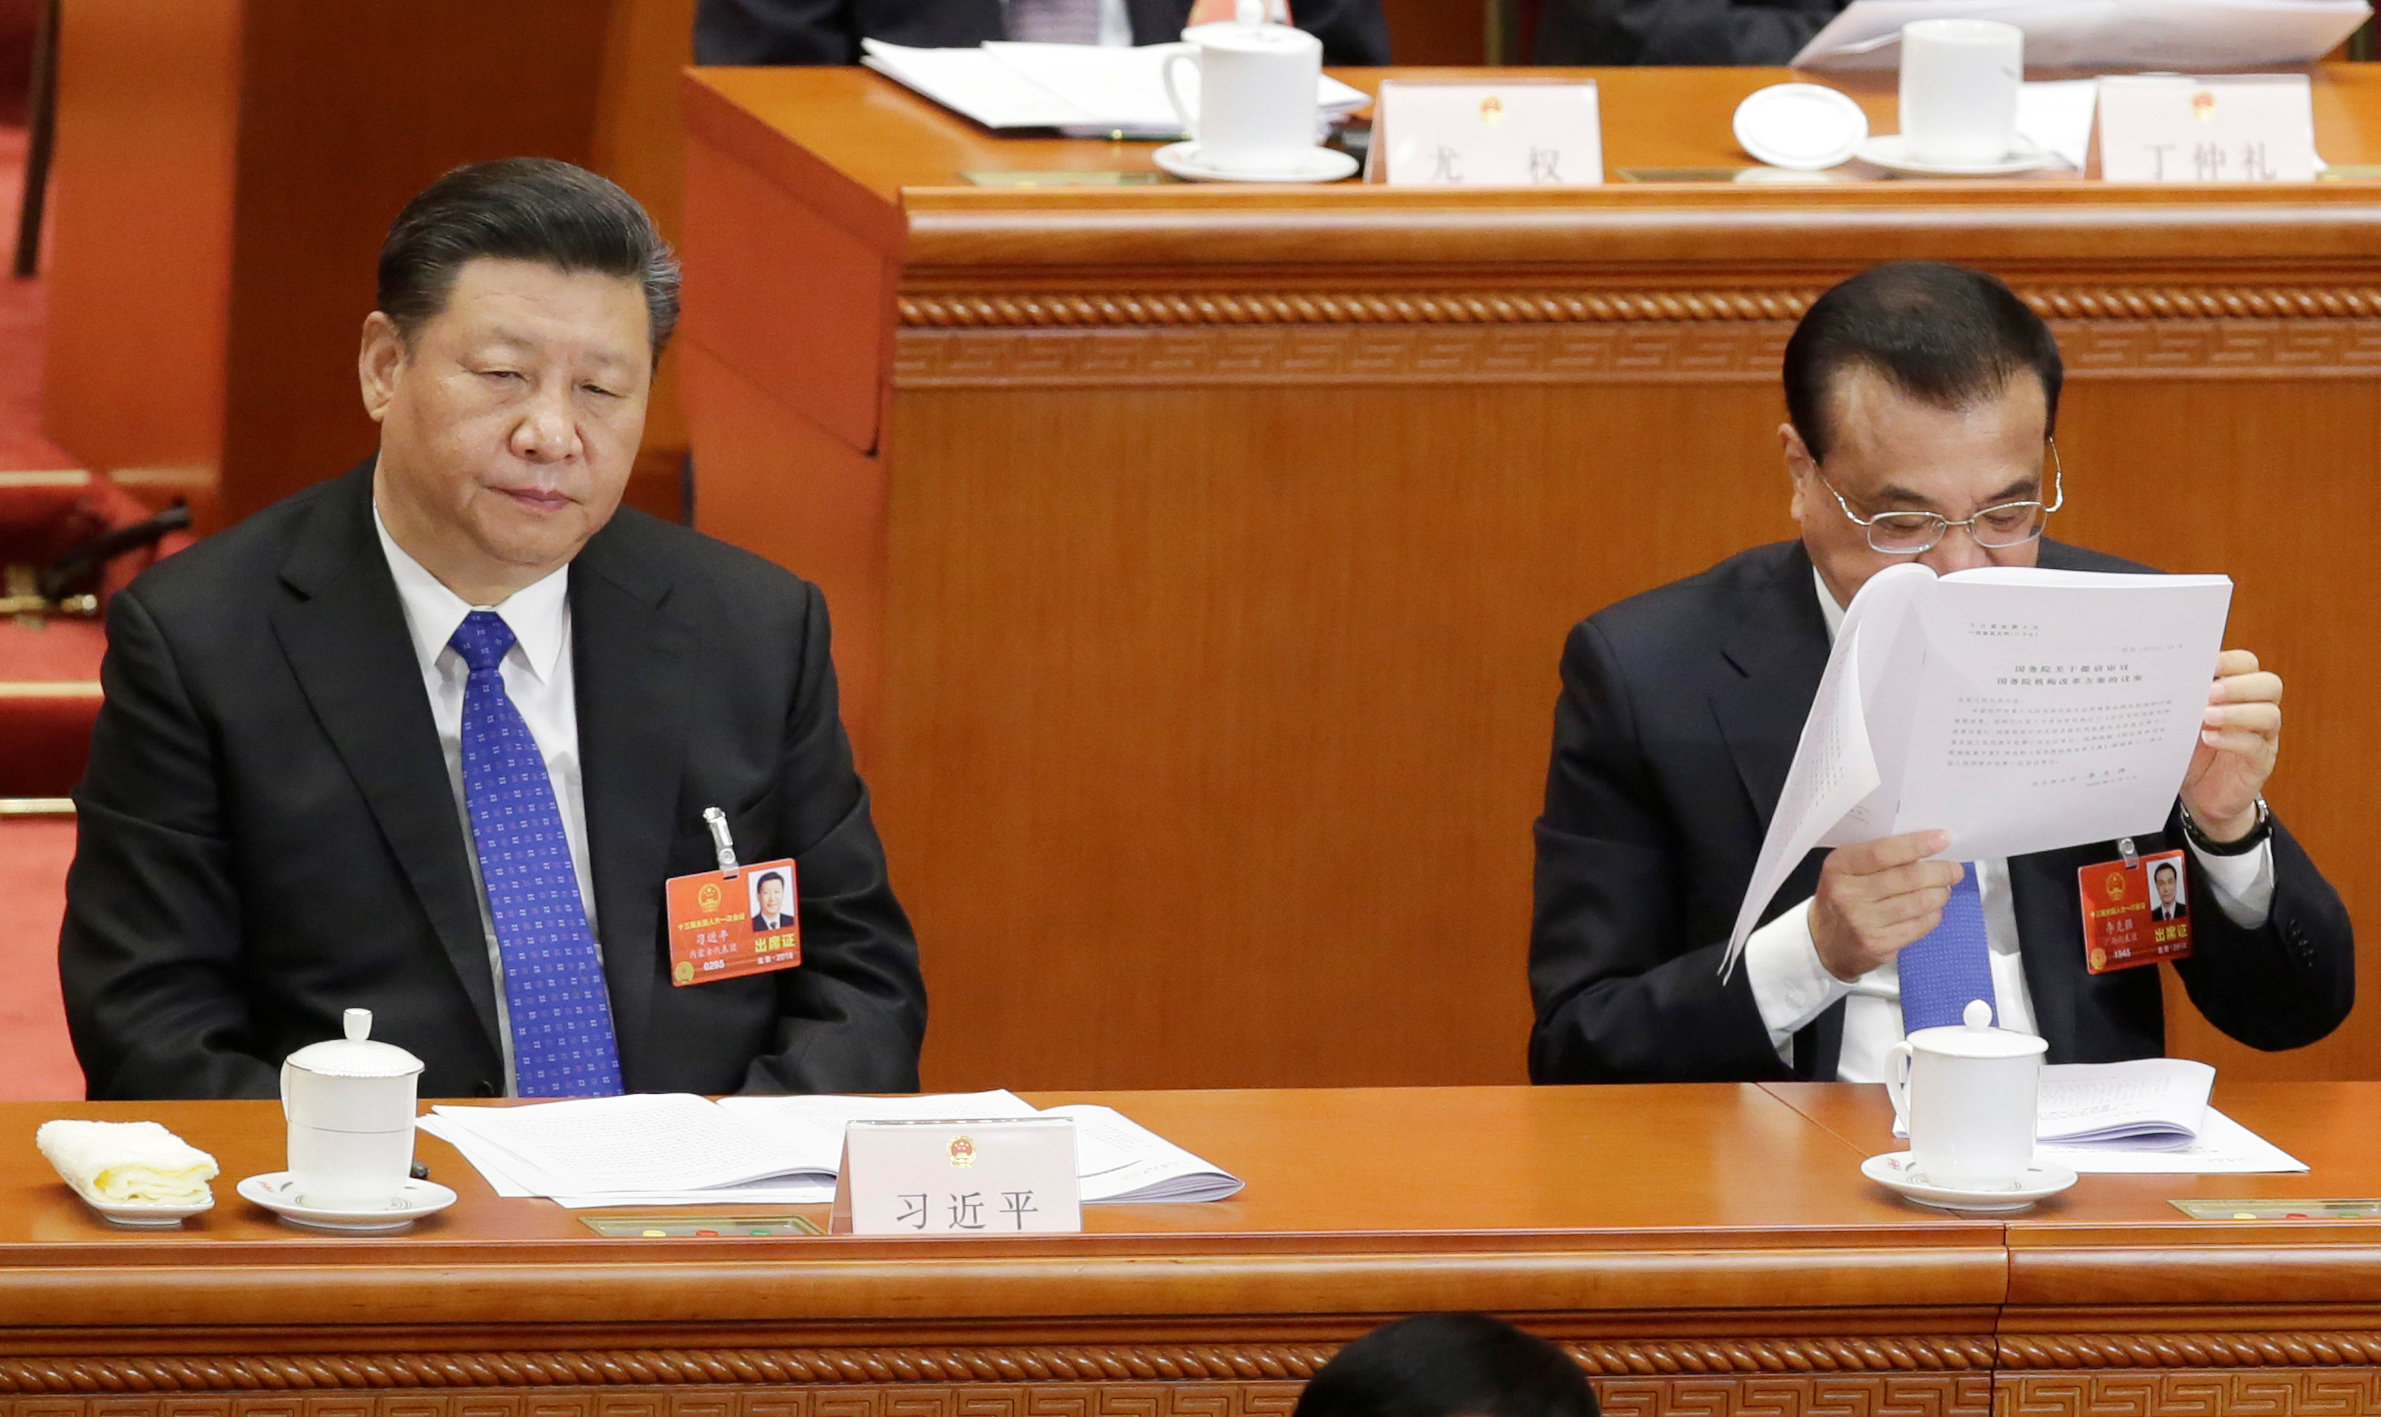 Chinese President Xi Jinping and Premier Li Keqiang attend the fourth plenary session of the NPC in Beijing